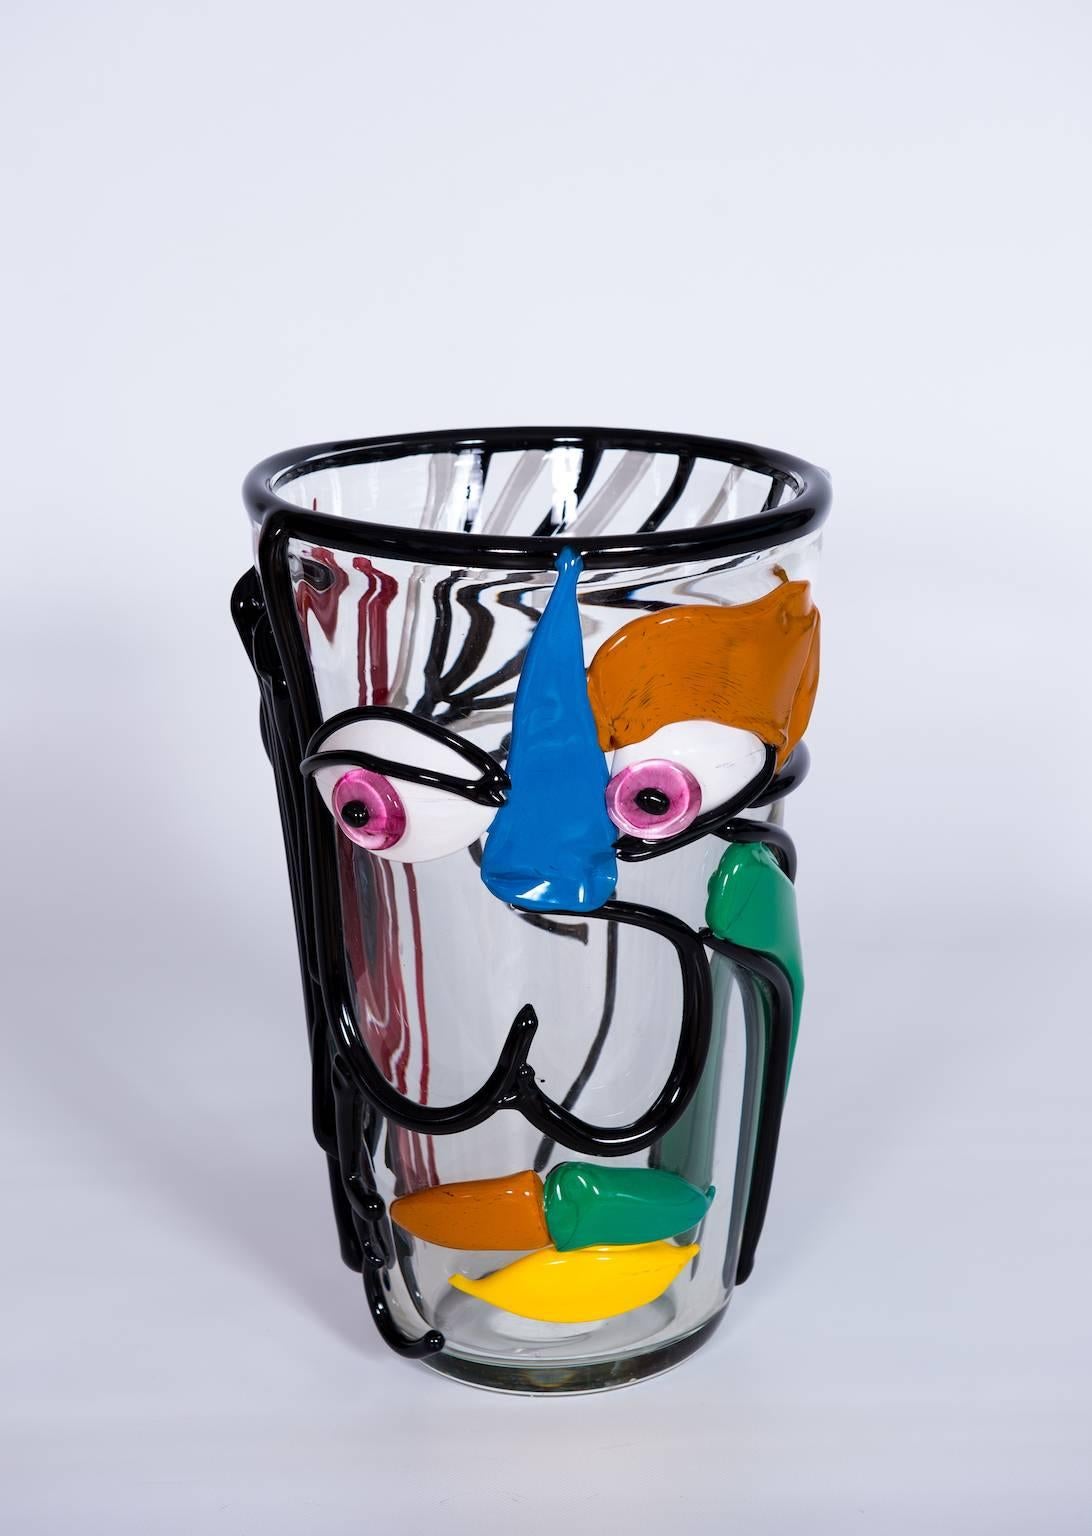 Amazing Italian Venetian Vase in Murano glass transparent with multi-color refinished, with a Picasso face style represented on the vase in a unique and elegant style. Attributed to Cenedese, circa 1970s and entirely realized handcrafted and